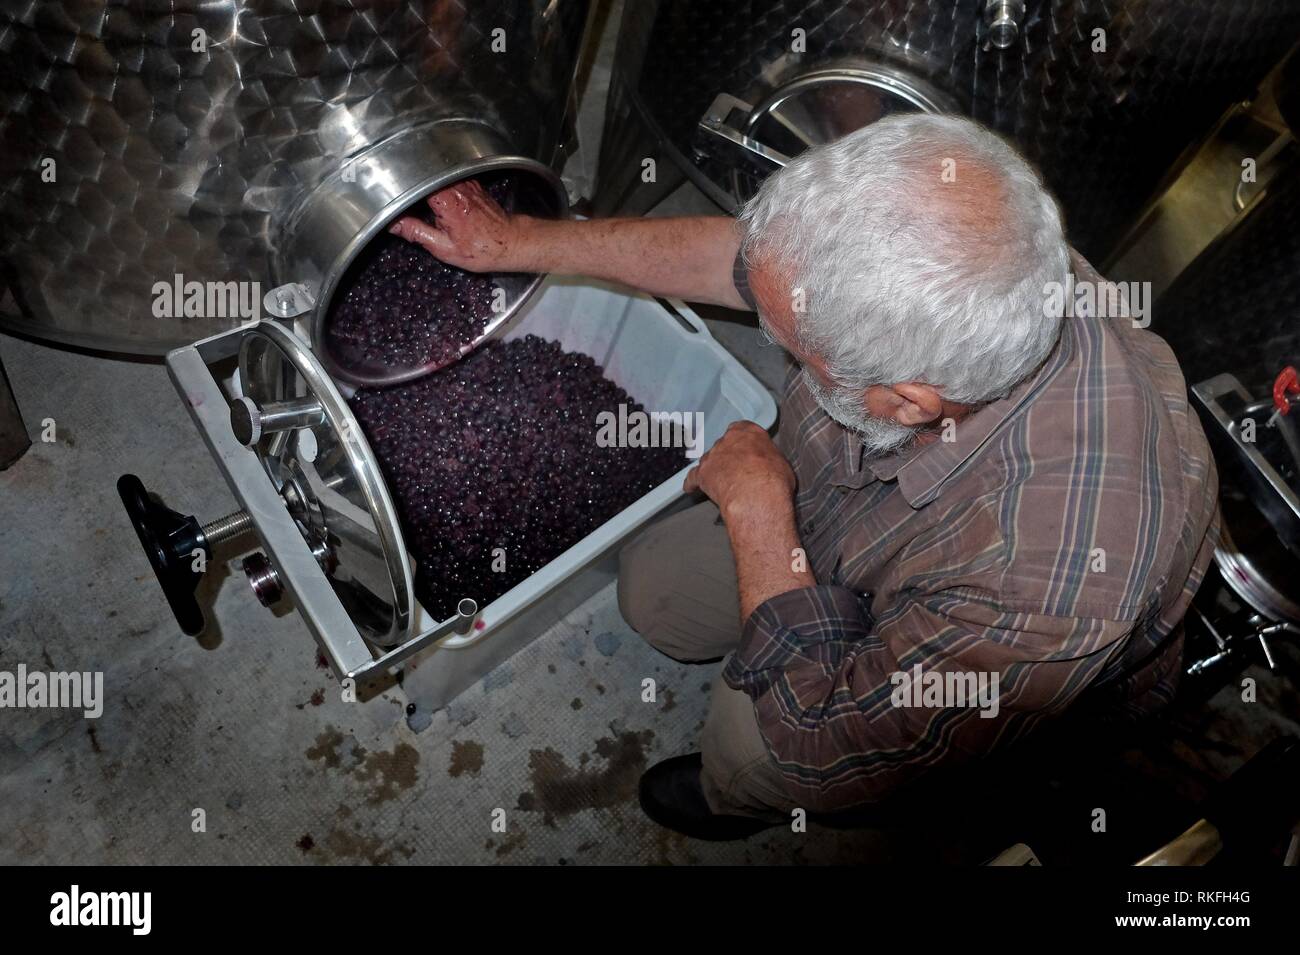 At a boutique winery in the Herault of France a worker removes by hand the stems from newly harvest Merlot grapes. Stock Photo